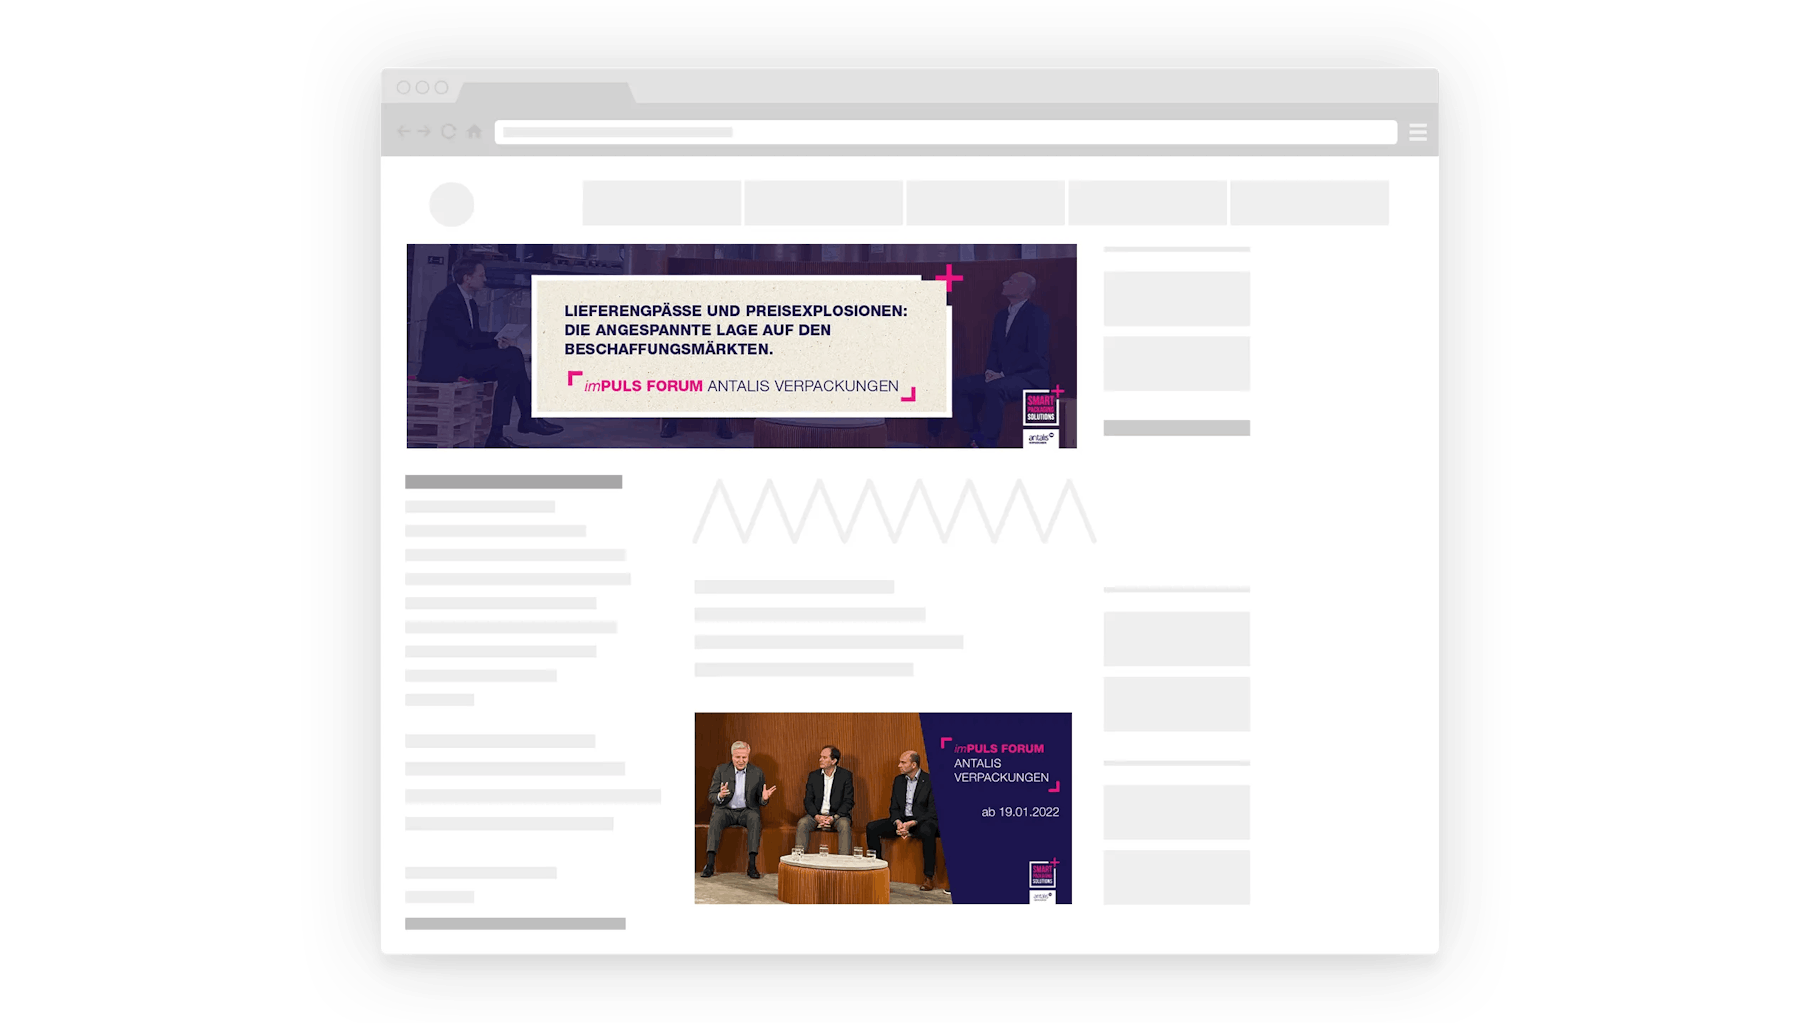 A report on the website of Antalis Verpackungen about the ImPuls Forum 